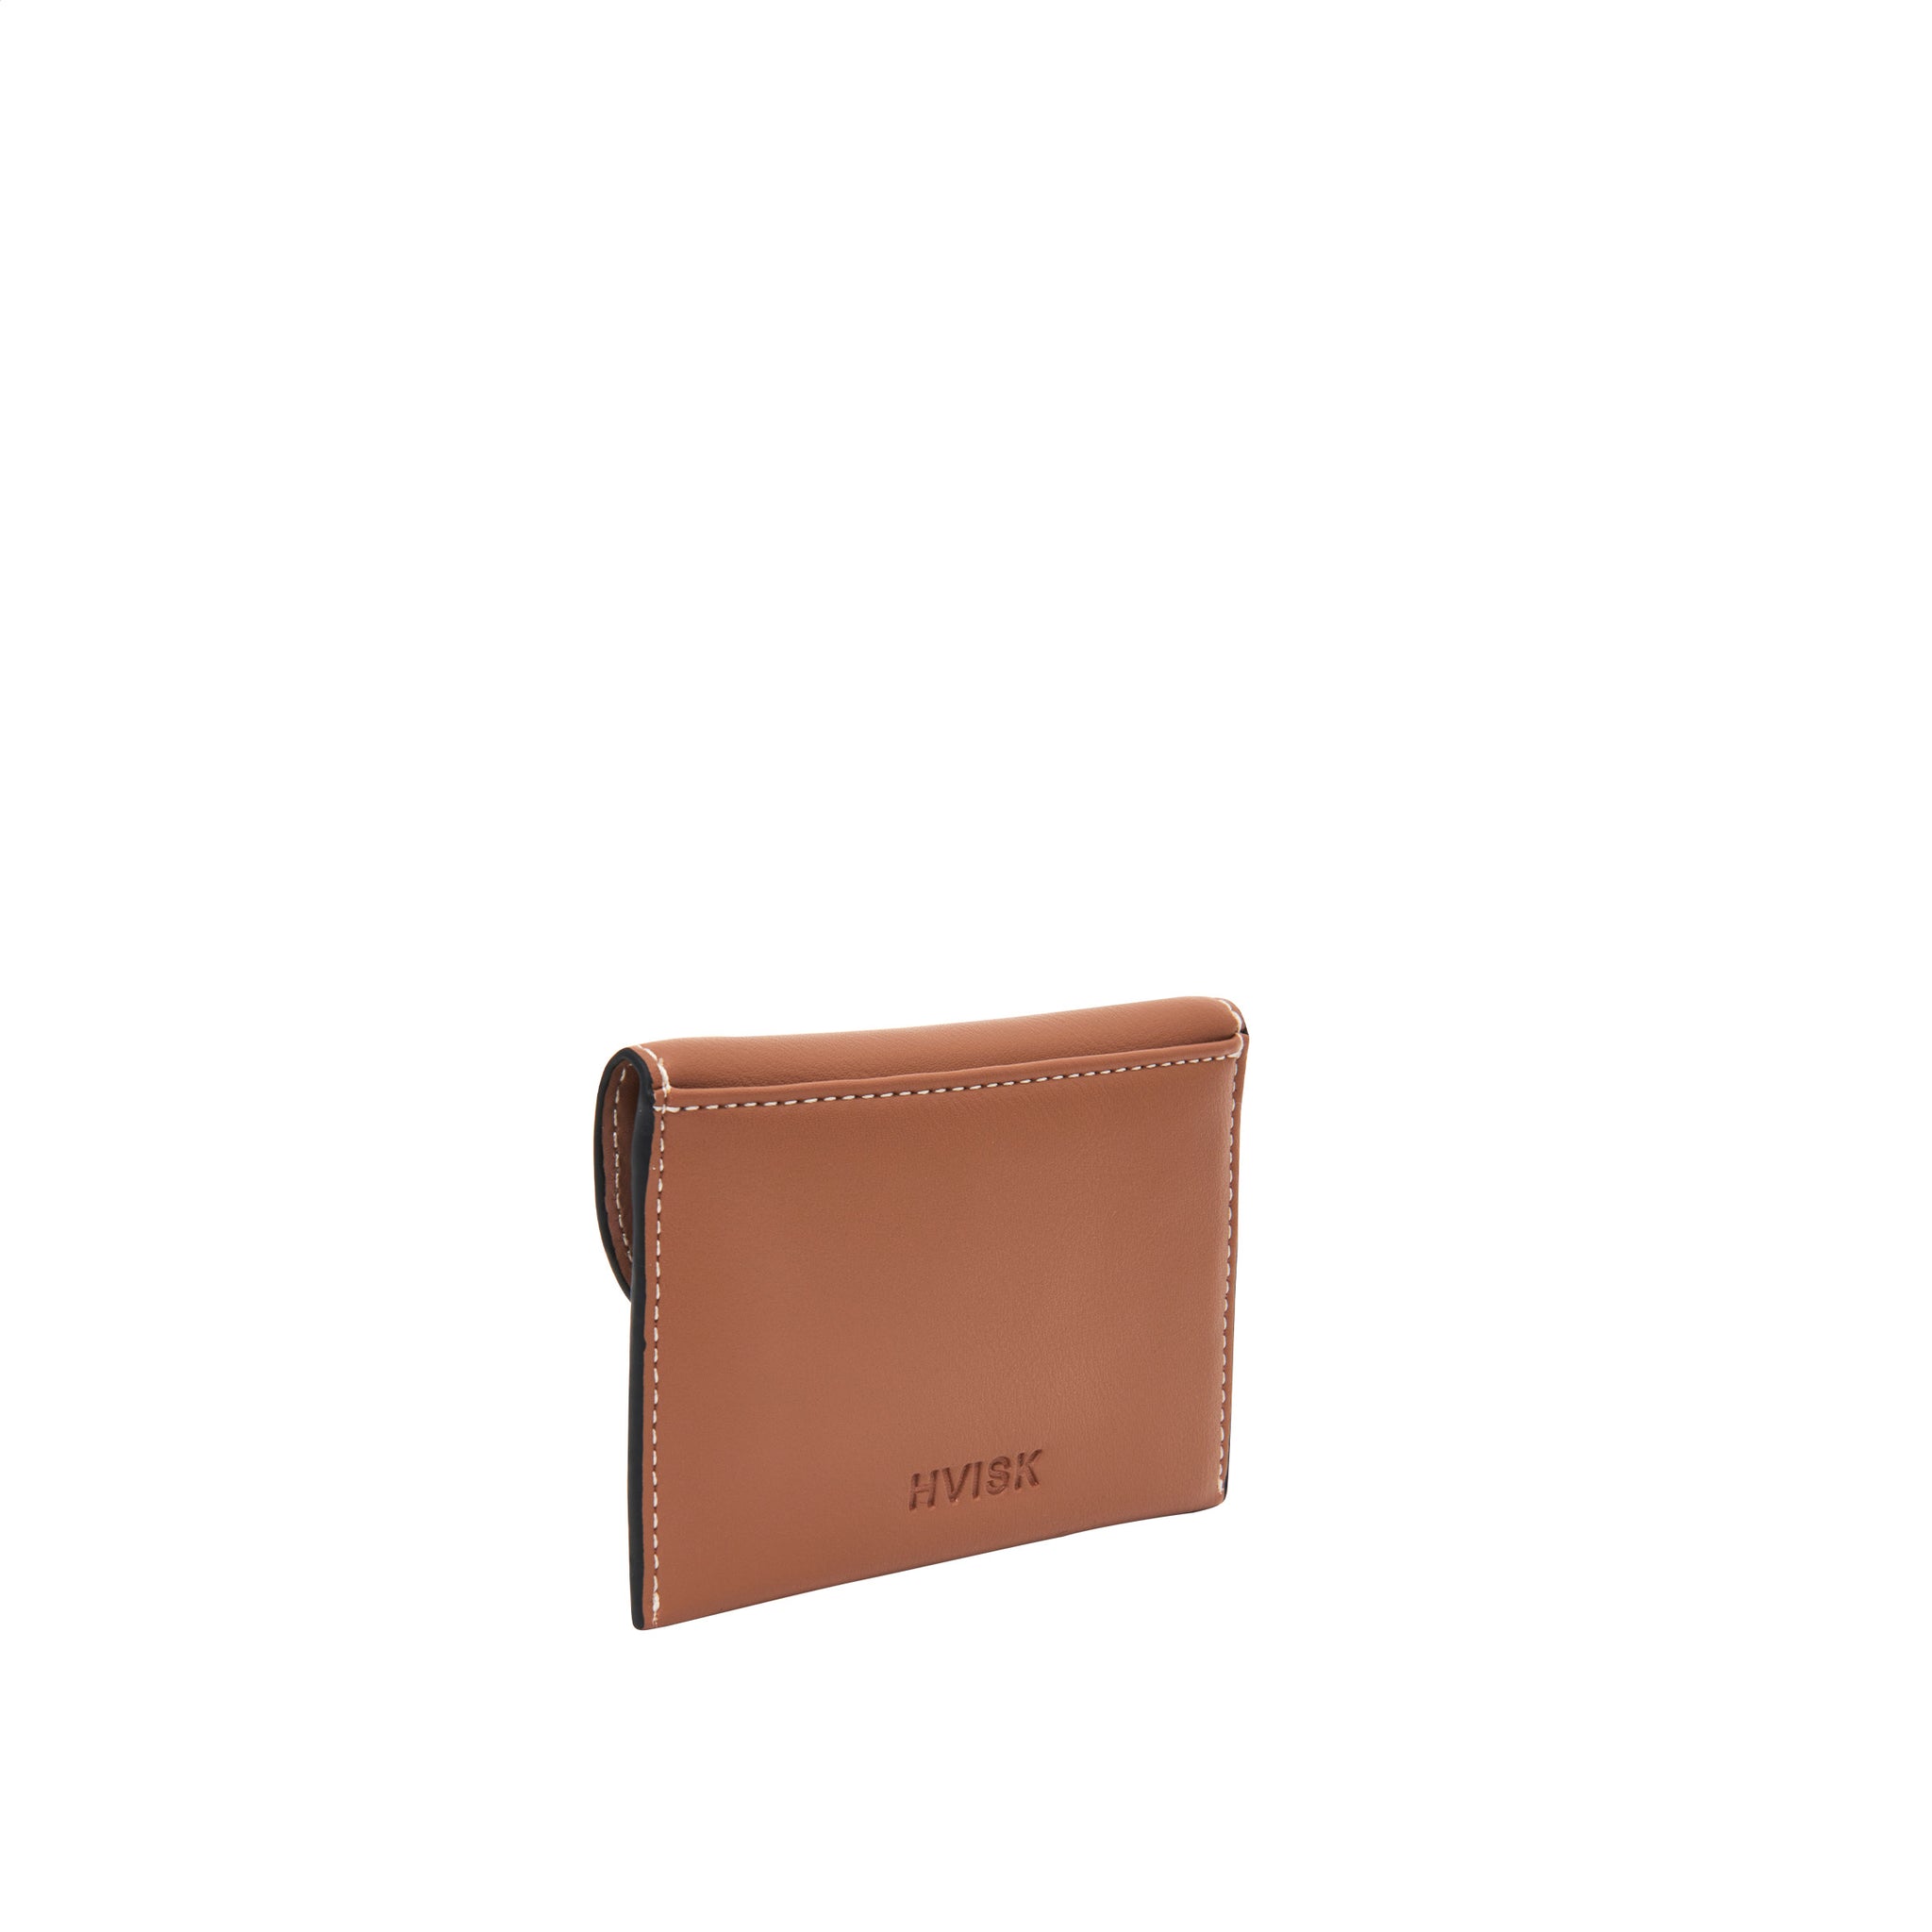 WALLET WAVE SOFT STRUCTURE - HUSH BROWN